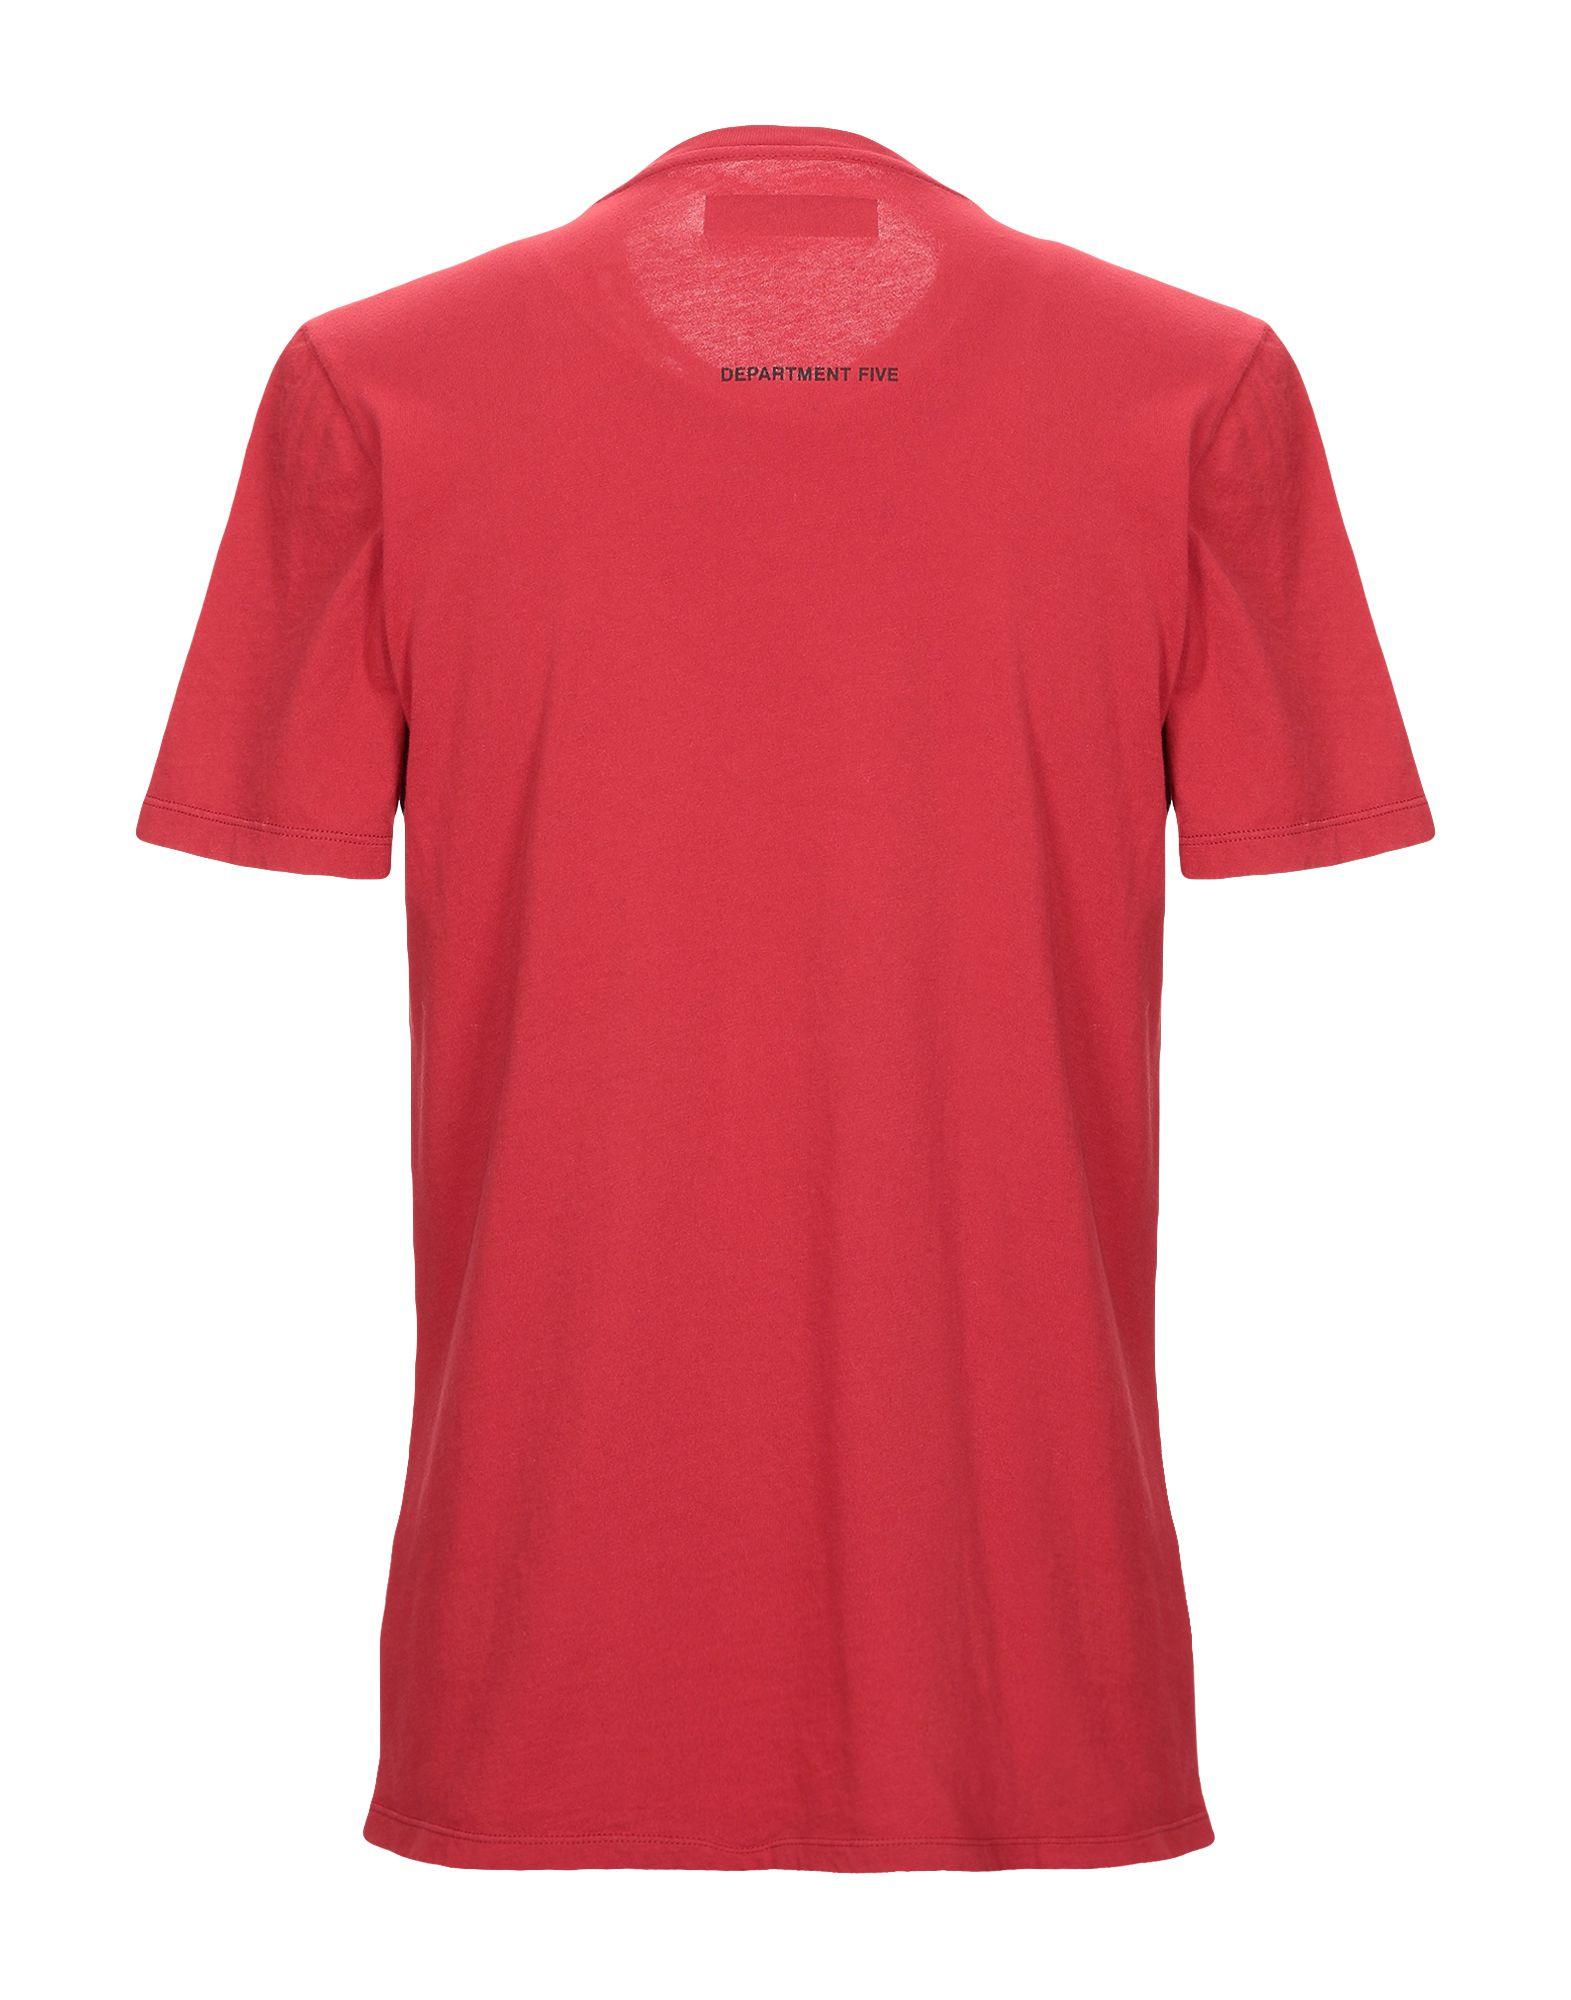 Department 5 T-shirt in Red for Men - Lyst